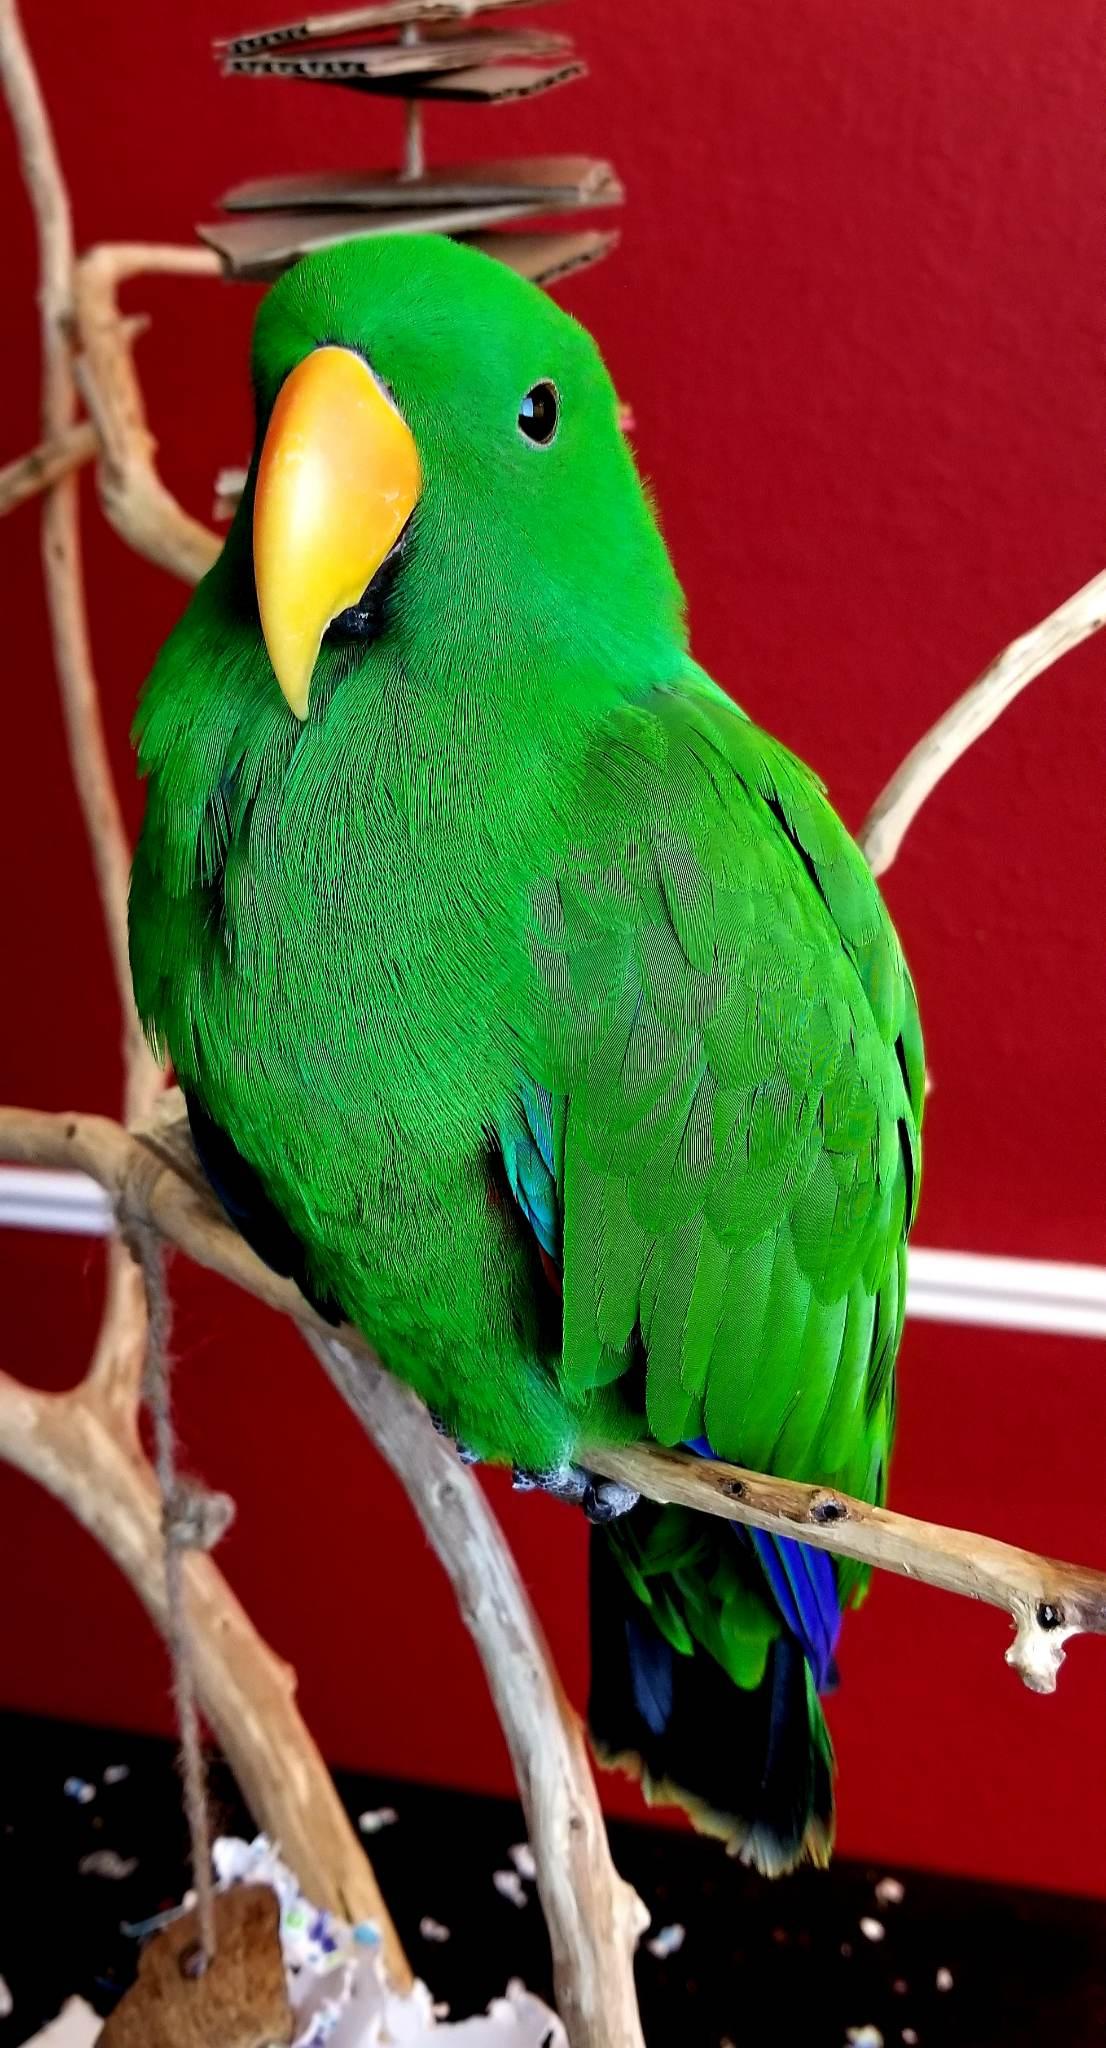 Tiki the Solomon Island eclectus parrot. (Courtesy of Brent Chadwell)